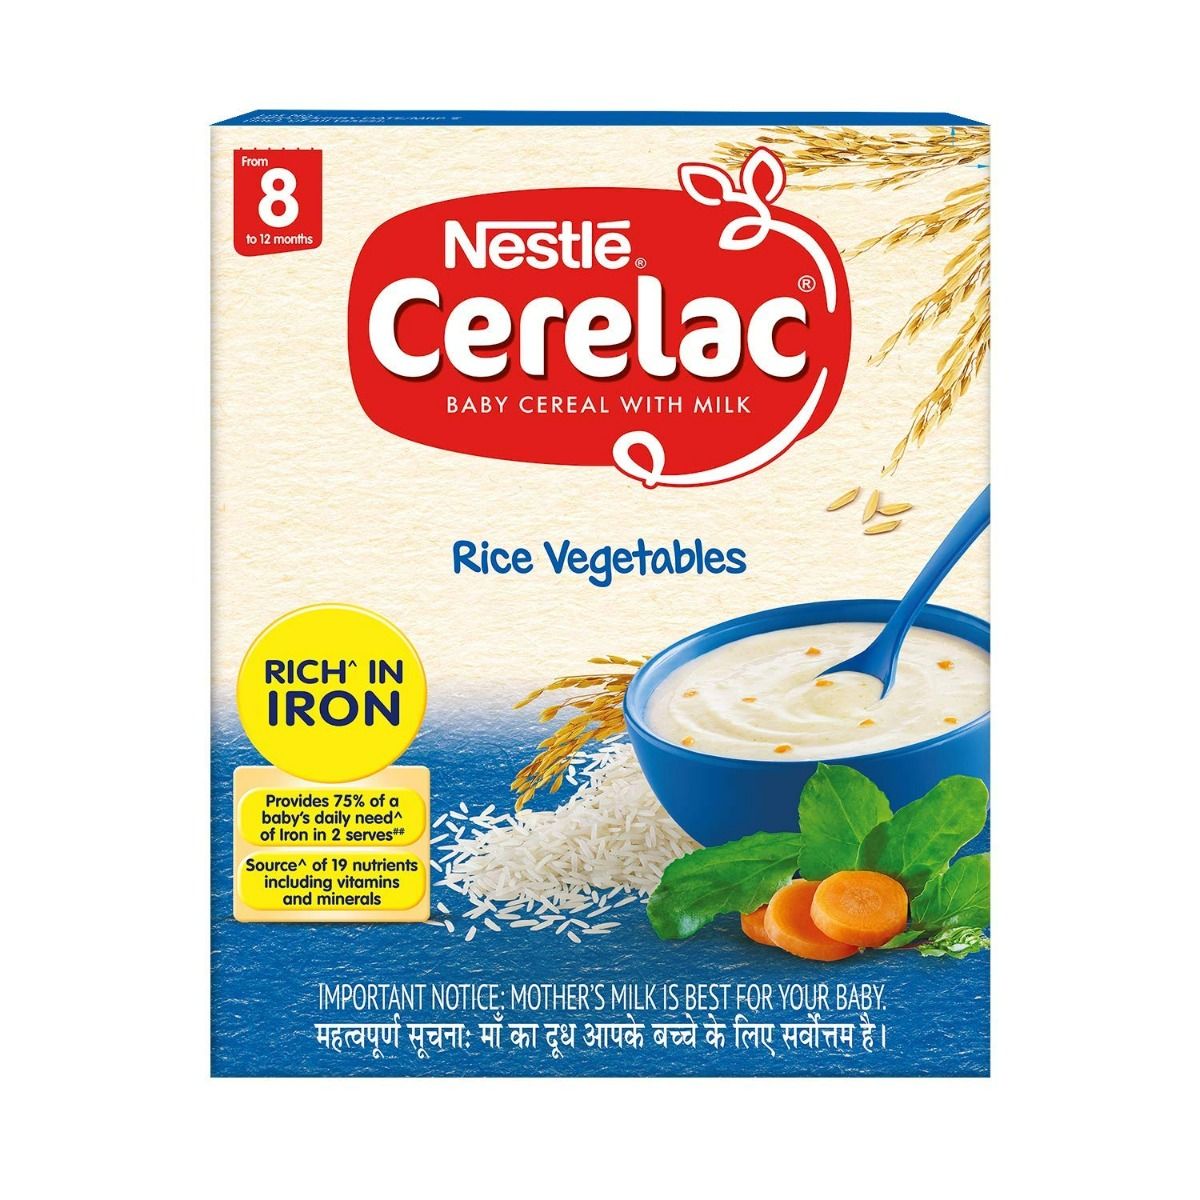 Nestle Cerelac Rice Vegetables Baby Cereal, 8 to 12 Months, 300 gm Refill Pack, Pack of 1 